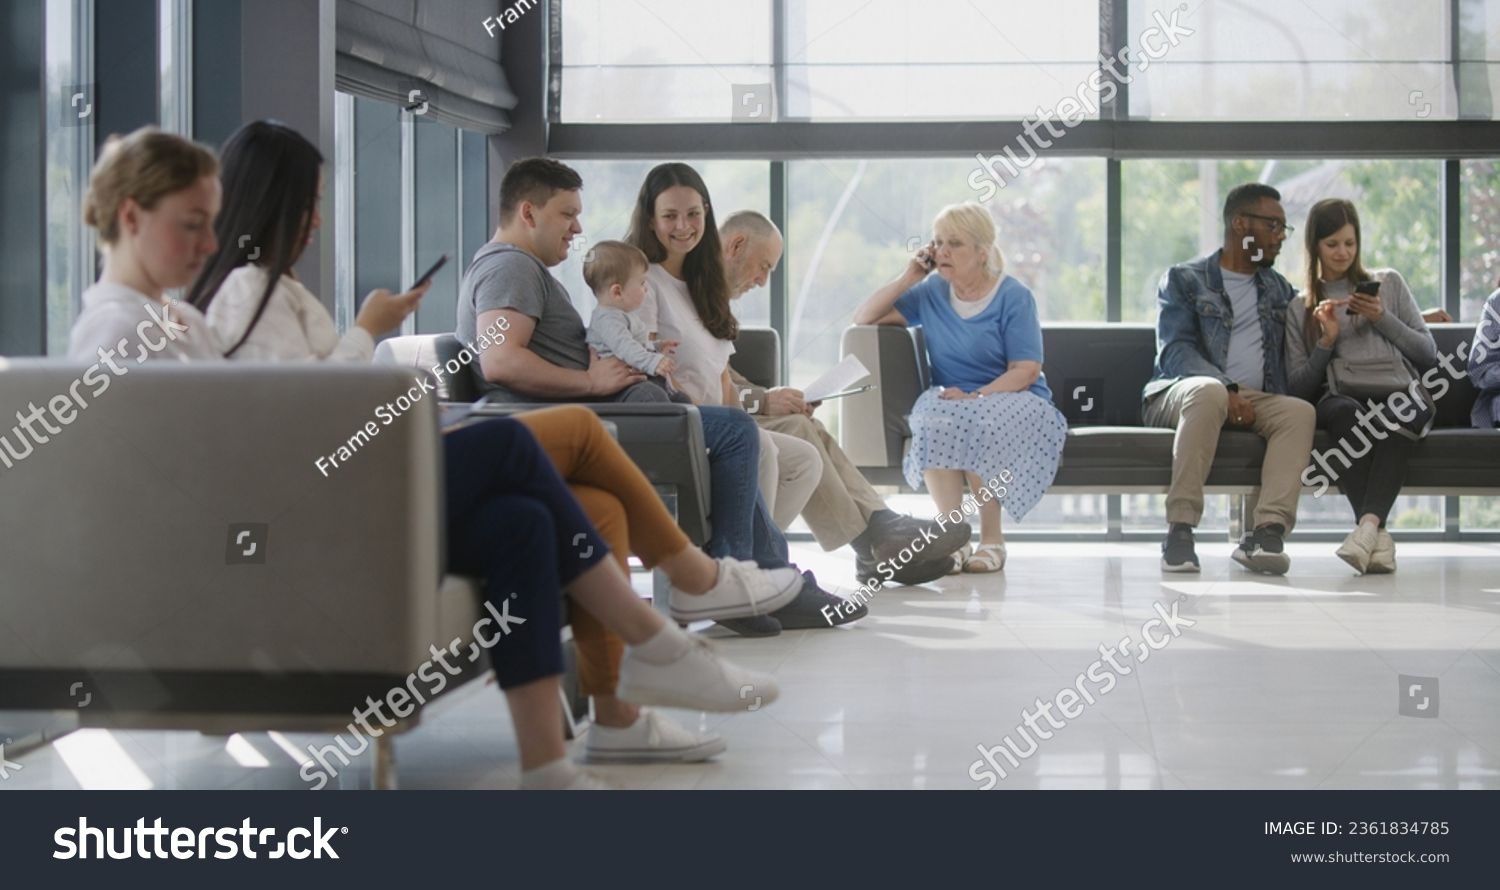 Diverse multicultural people sit on couches in clinic lobby area, wait for appointment with doctor or medical test results. Waiting area in medical center with modern design. Healthcare system. #2361834785